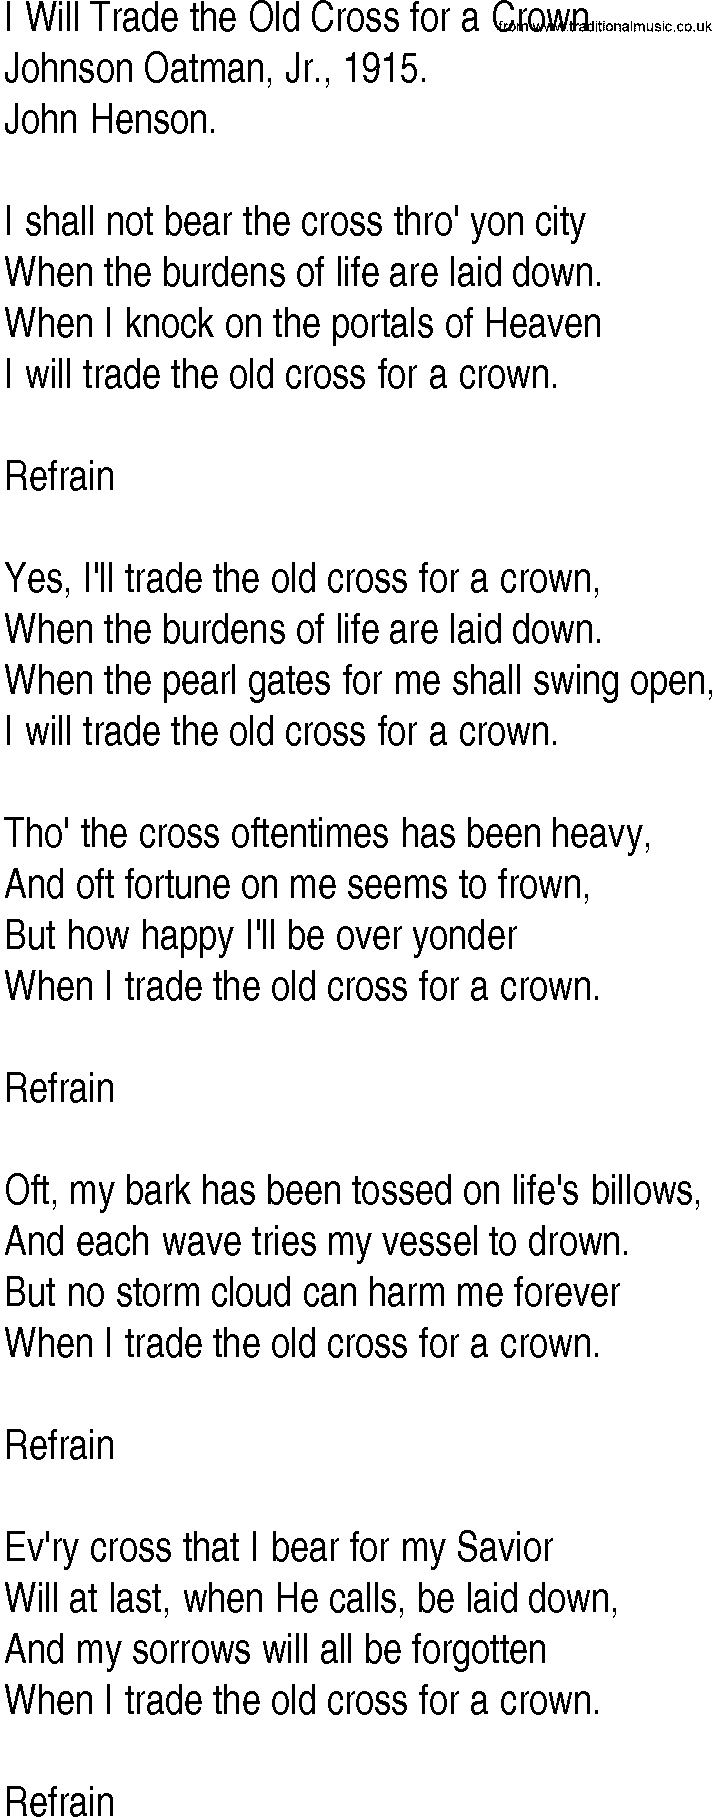 Hymn and Gospel Song: I Will Trade the Old Cross for a Crown by Johnson Oatman Jr lyrics